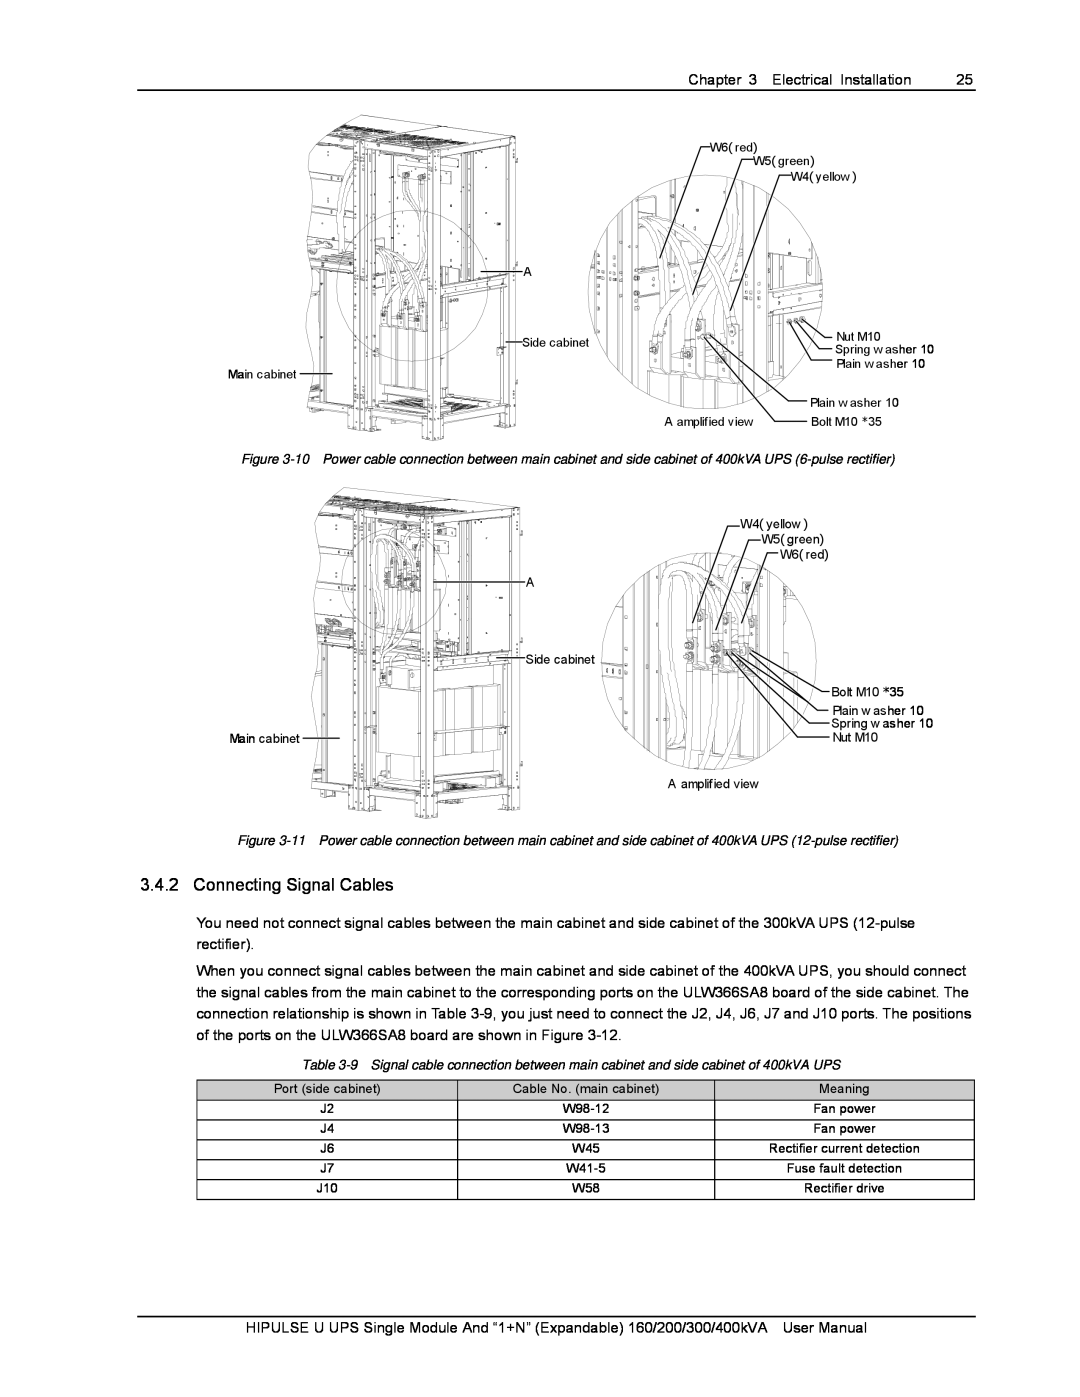 Emerson U/300/S/12P, U /400/S/12P, U/300/S/6P, U /400/S/6P, 400KVA, 200, 160 user manual Connecting Signal Cables 